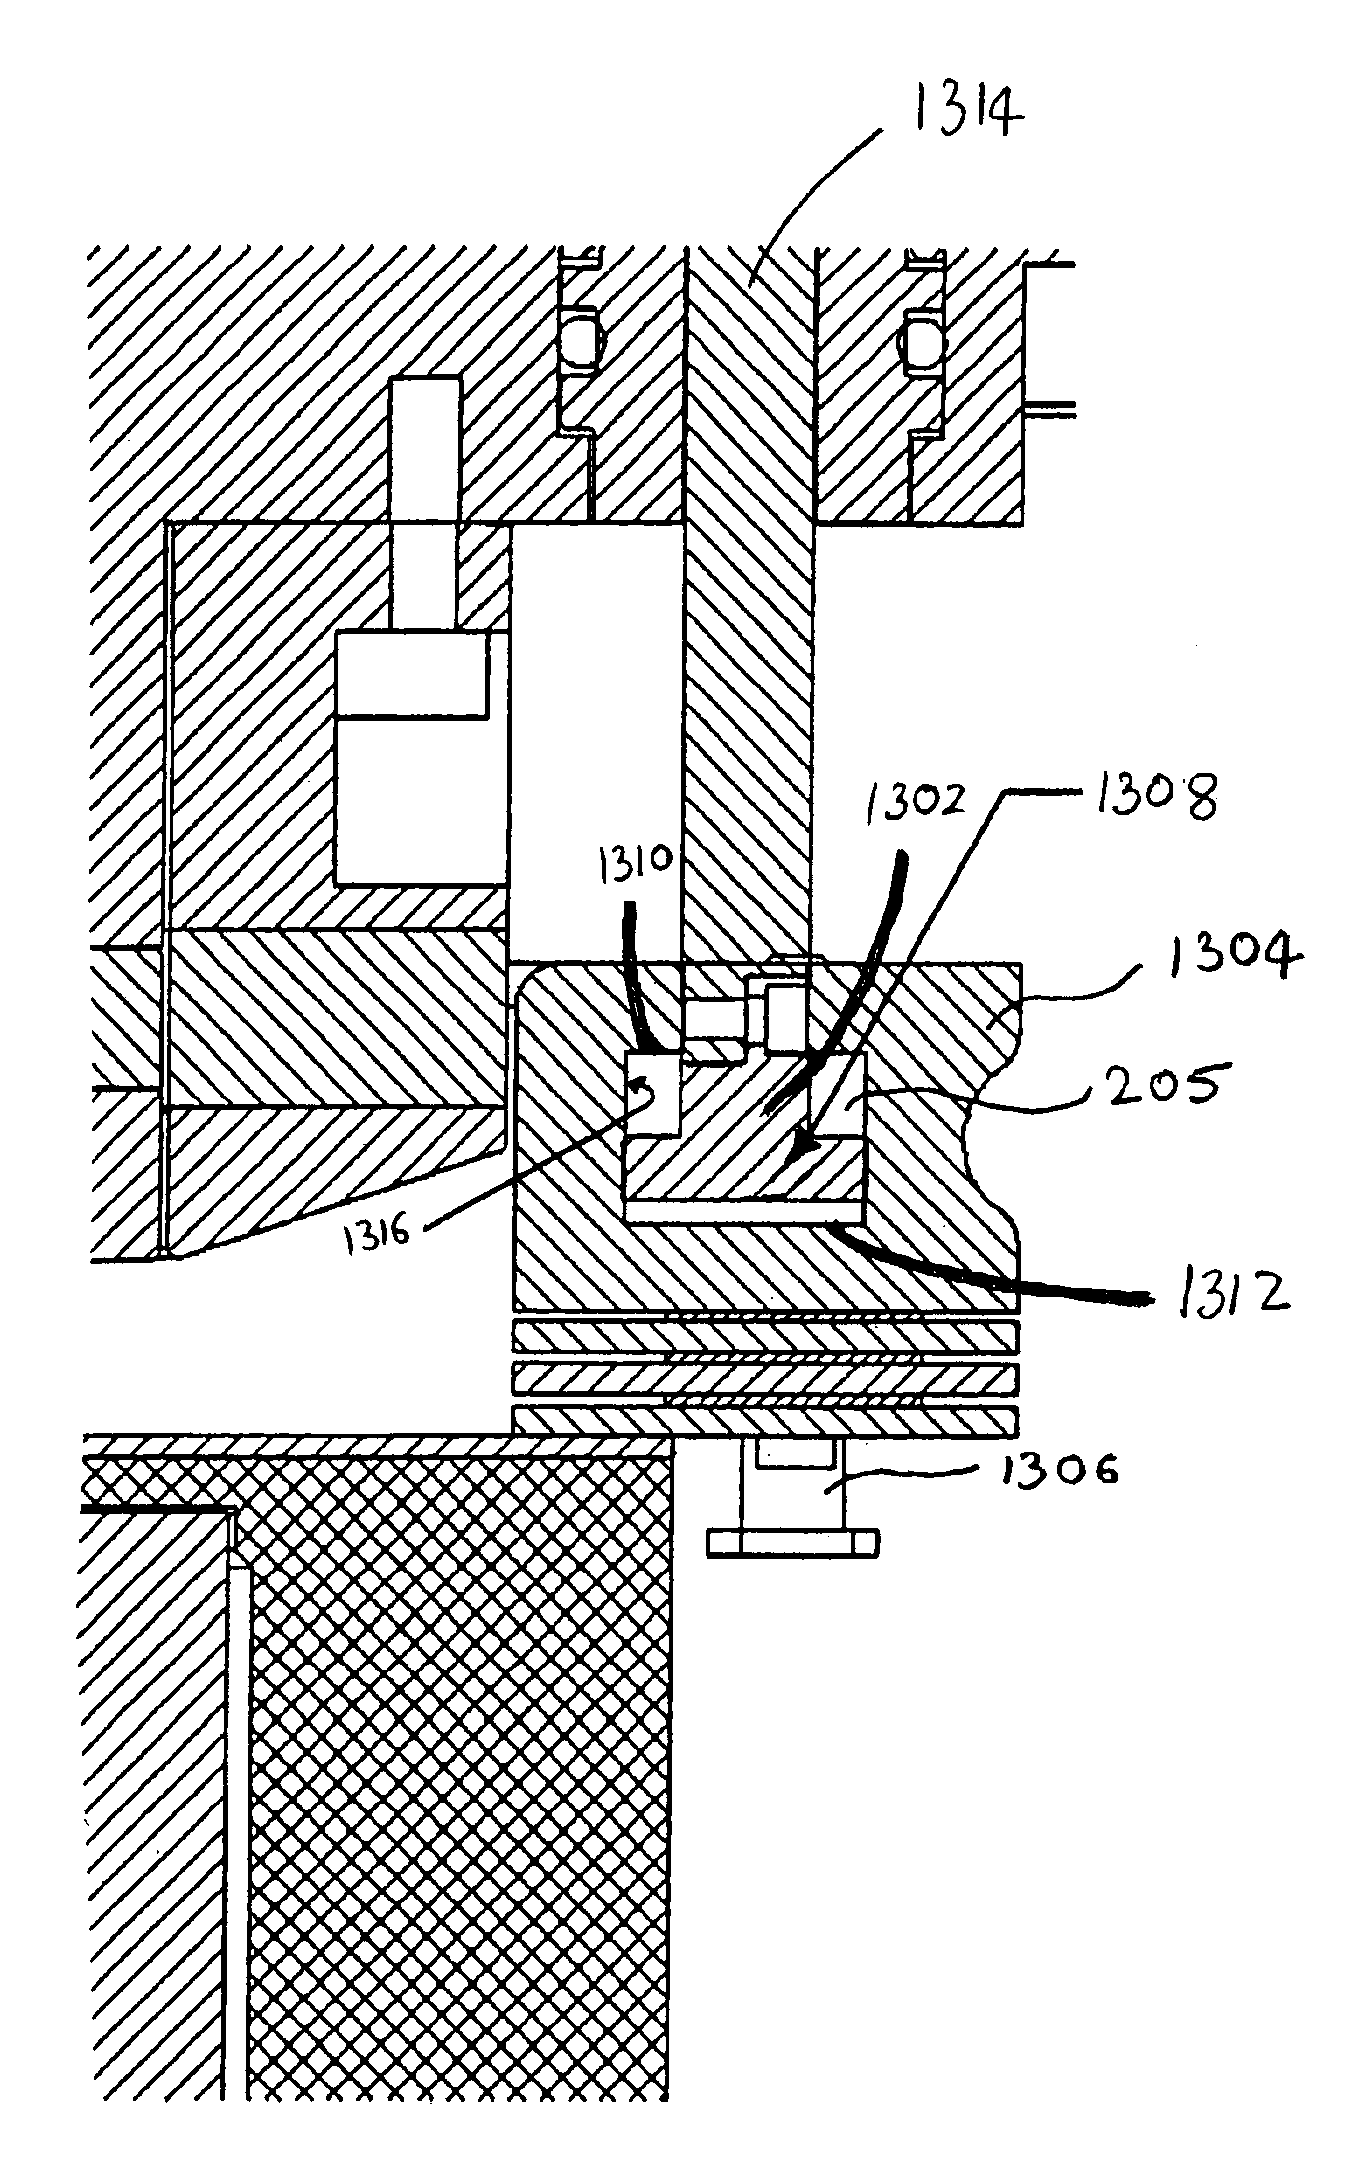 Twist-N-Lock wafer area pressure ring and assembly for reducing particulate contaminant in a plasma processing chamber